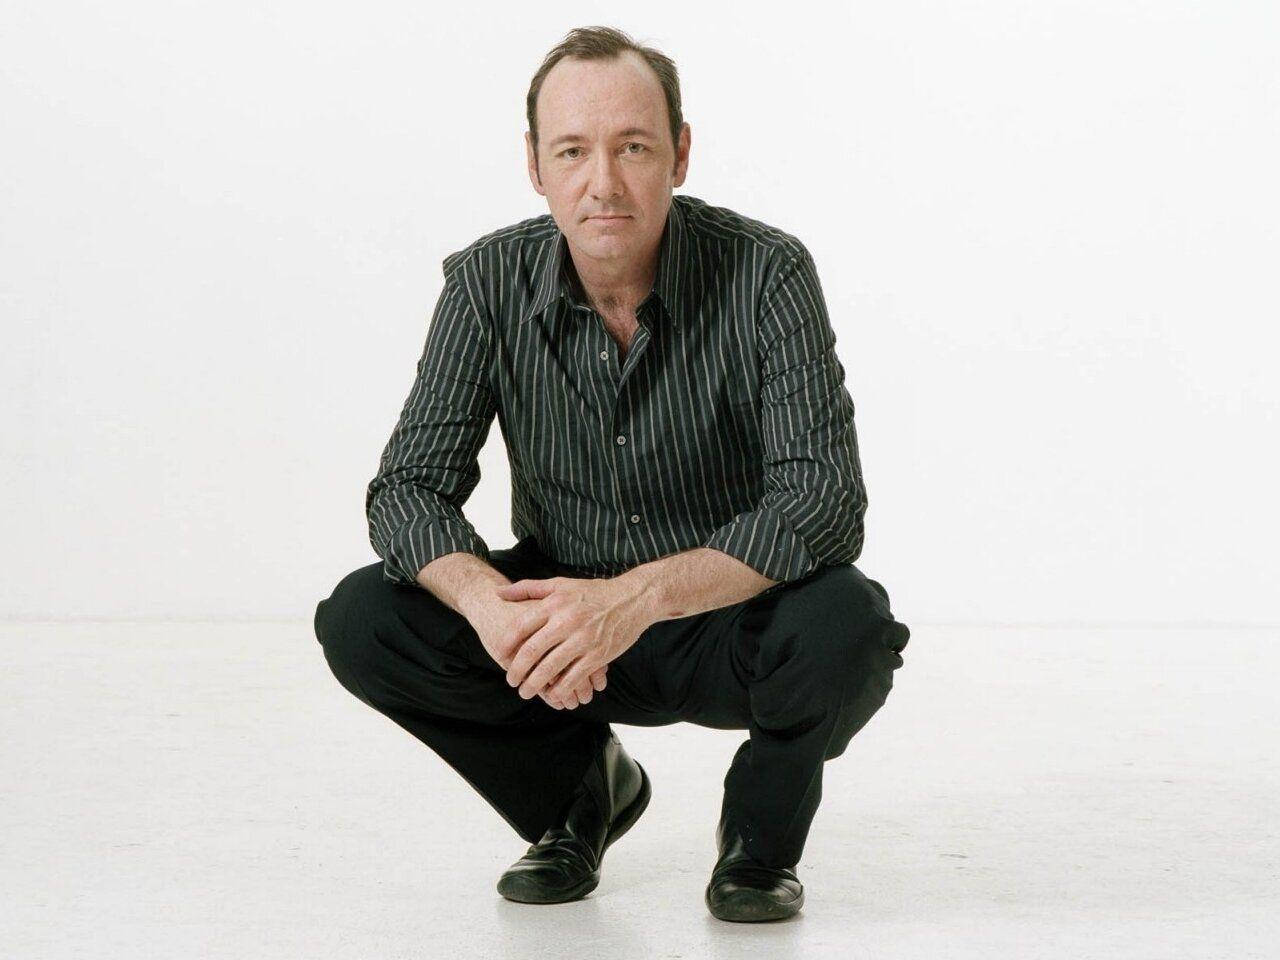 Top 999+ Kevin Spacey Wallpaper Full HD, 4K✅Free to Use